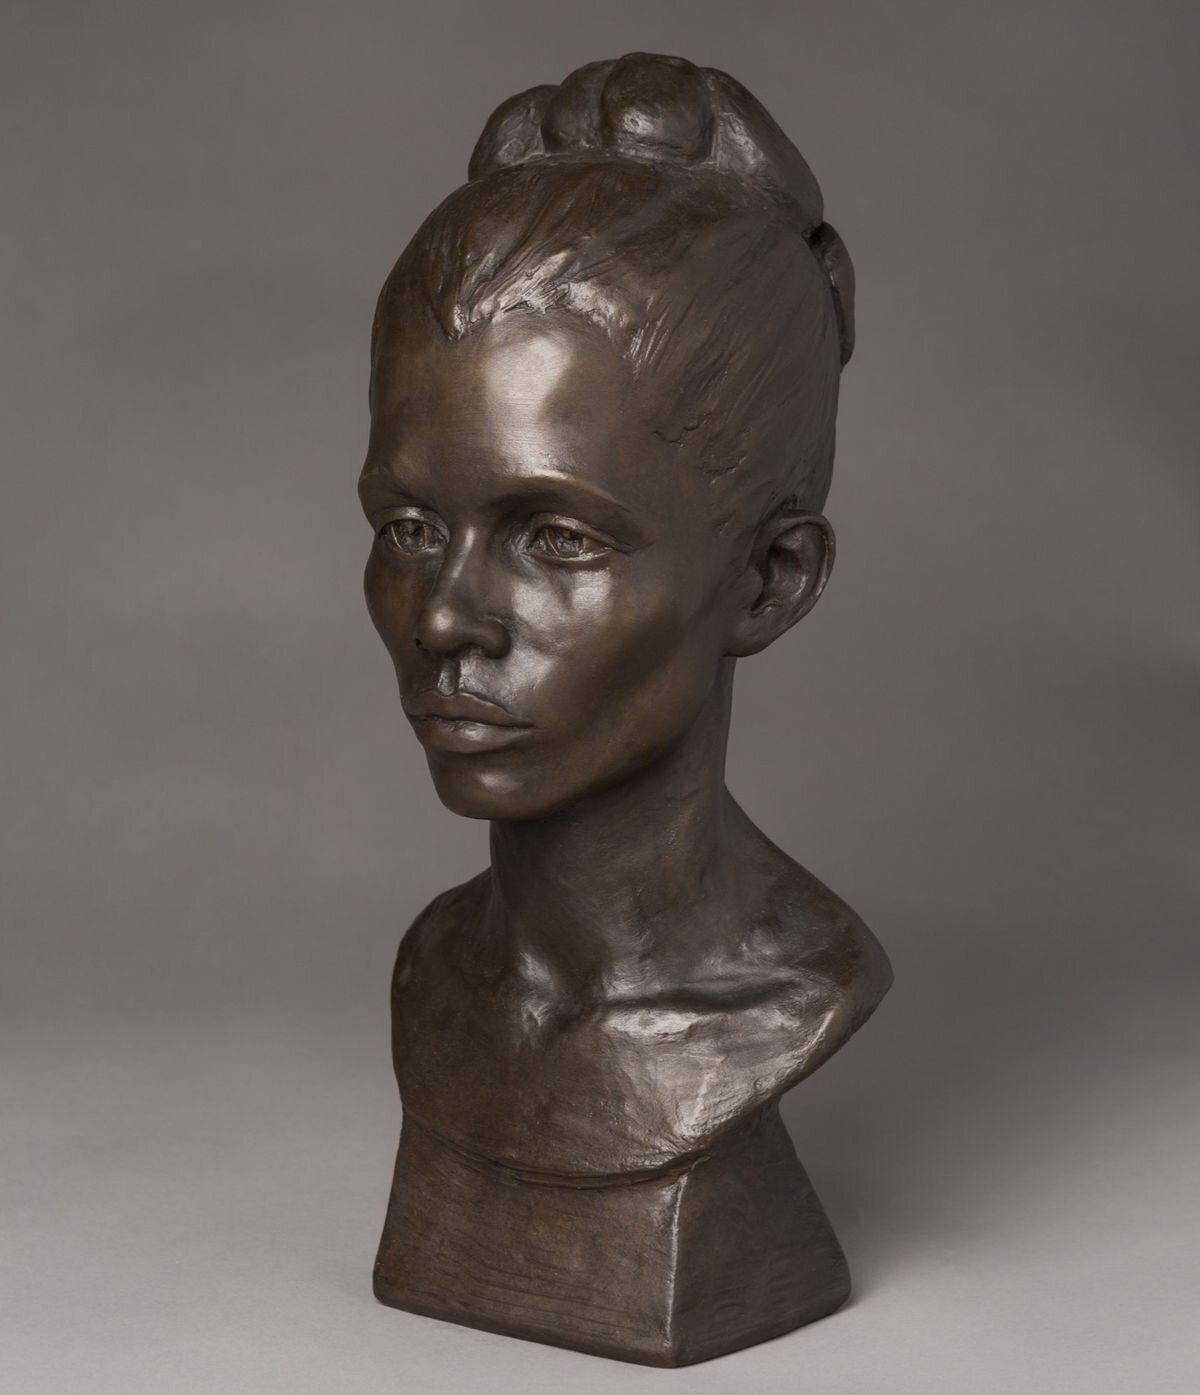 Augusta Savage,&nbsp;Gwendolyn&nbsp;Knight, 1934–35. Courtesy of the Walter O. Evans Collection of African American Art.